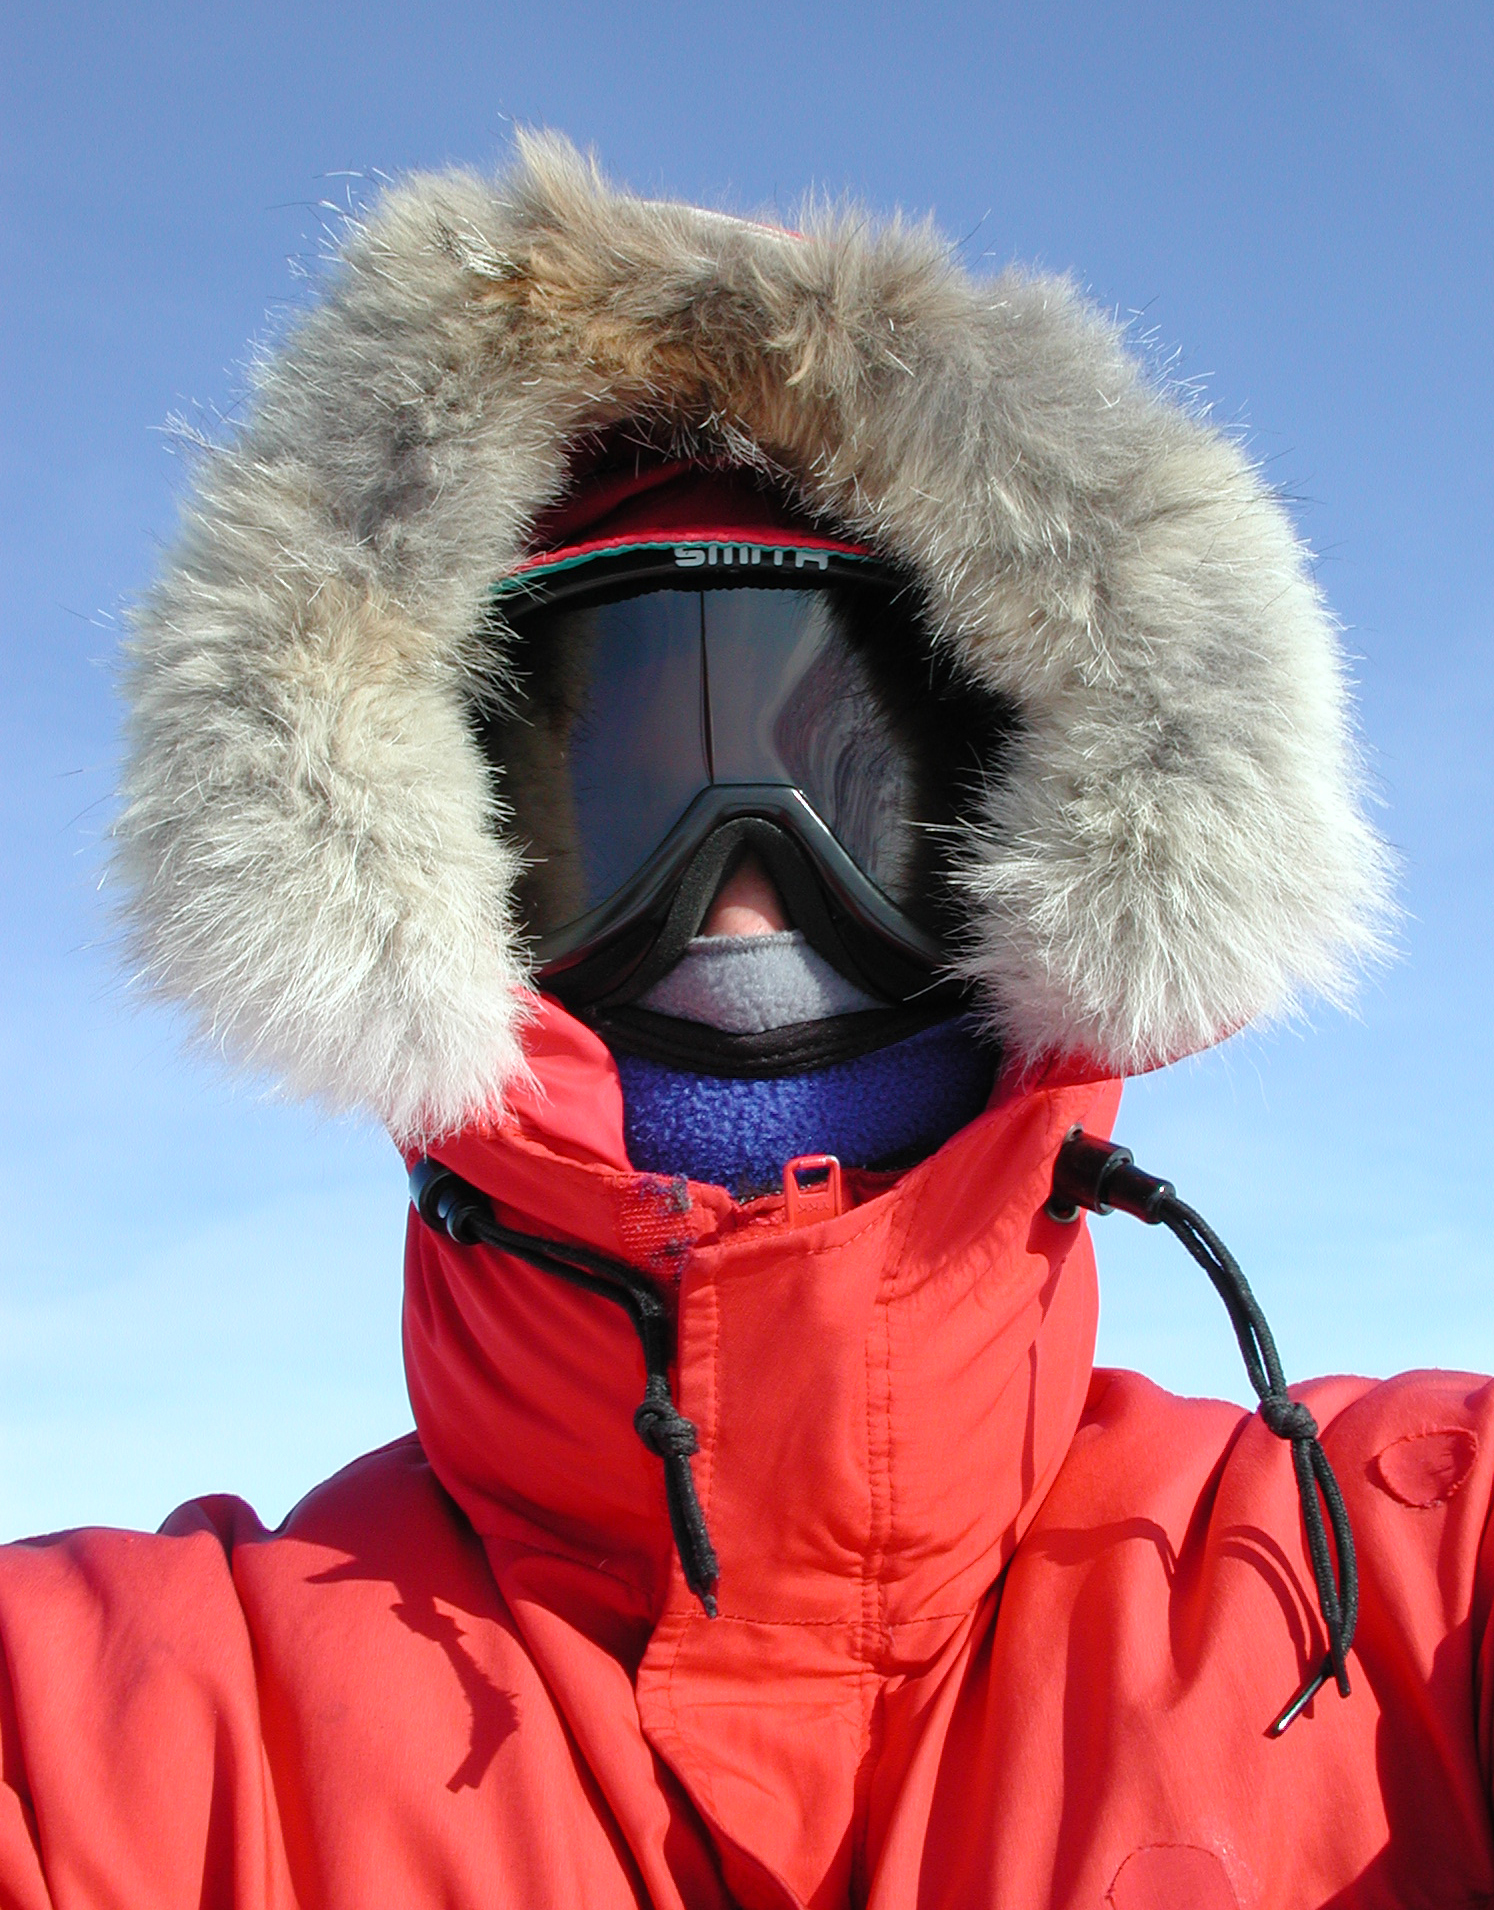 The head and shoulders of a person fully covered with goggles and red parka hood.